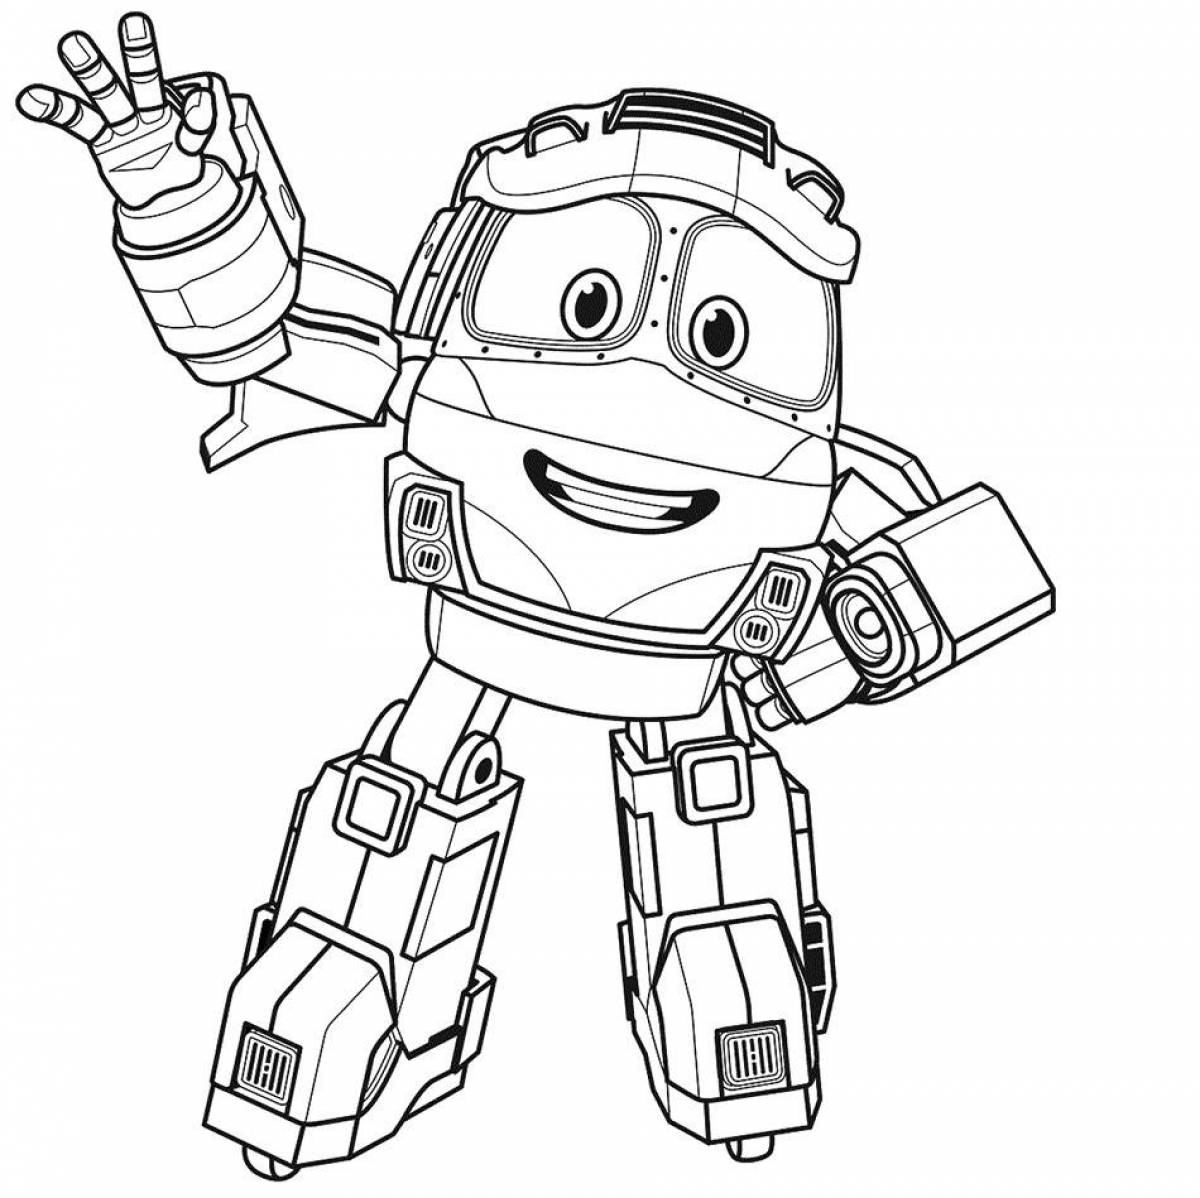 Coloring book happy tobot